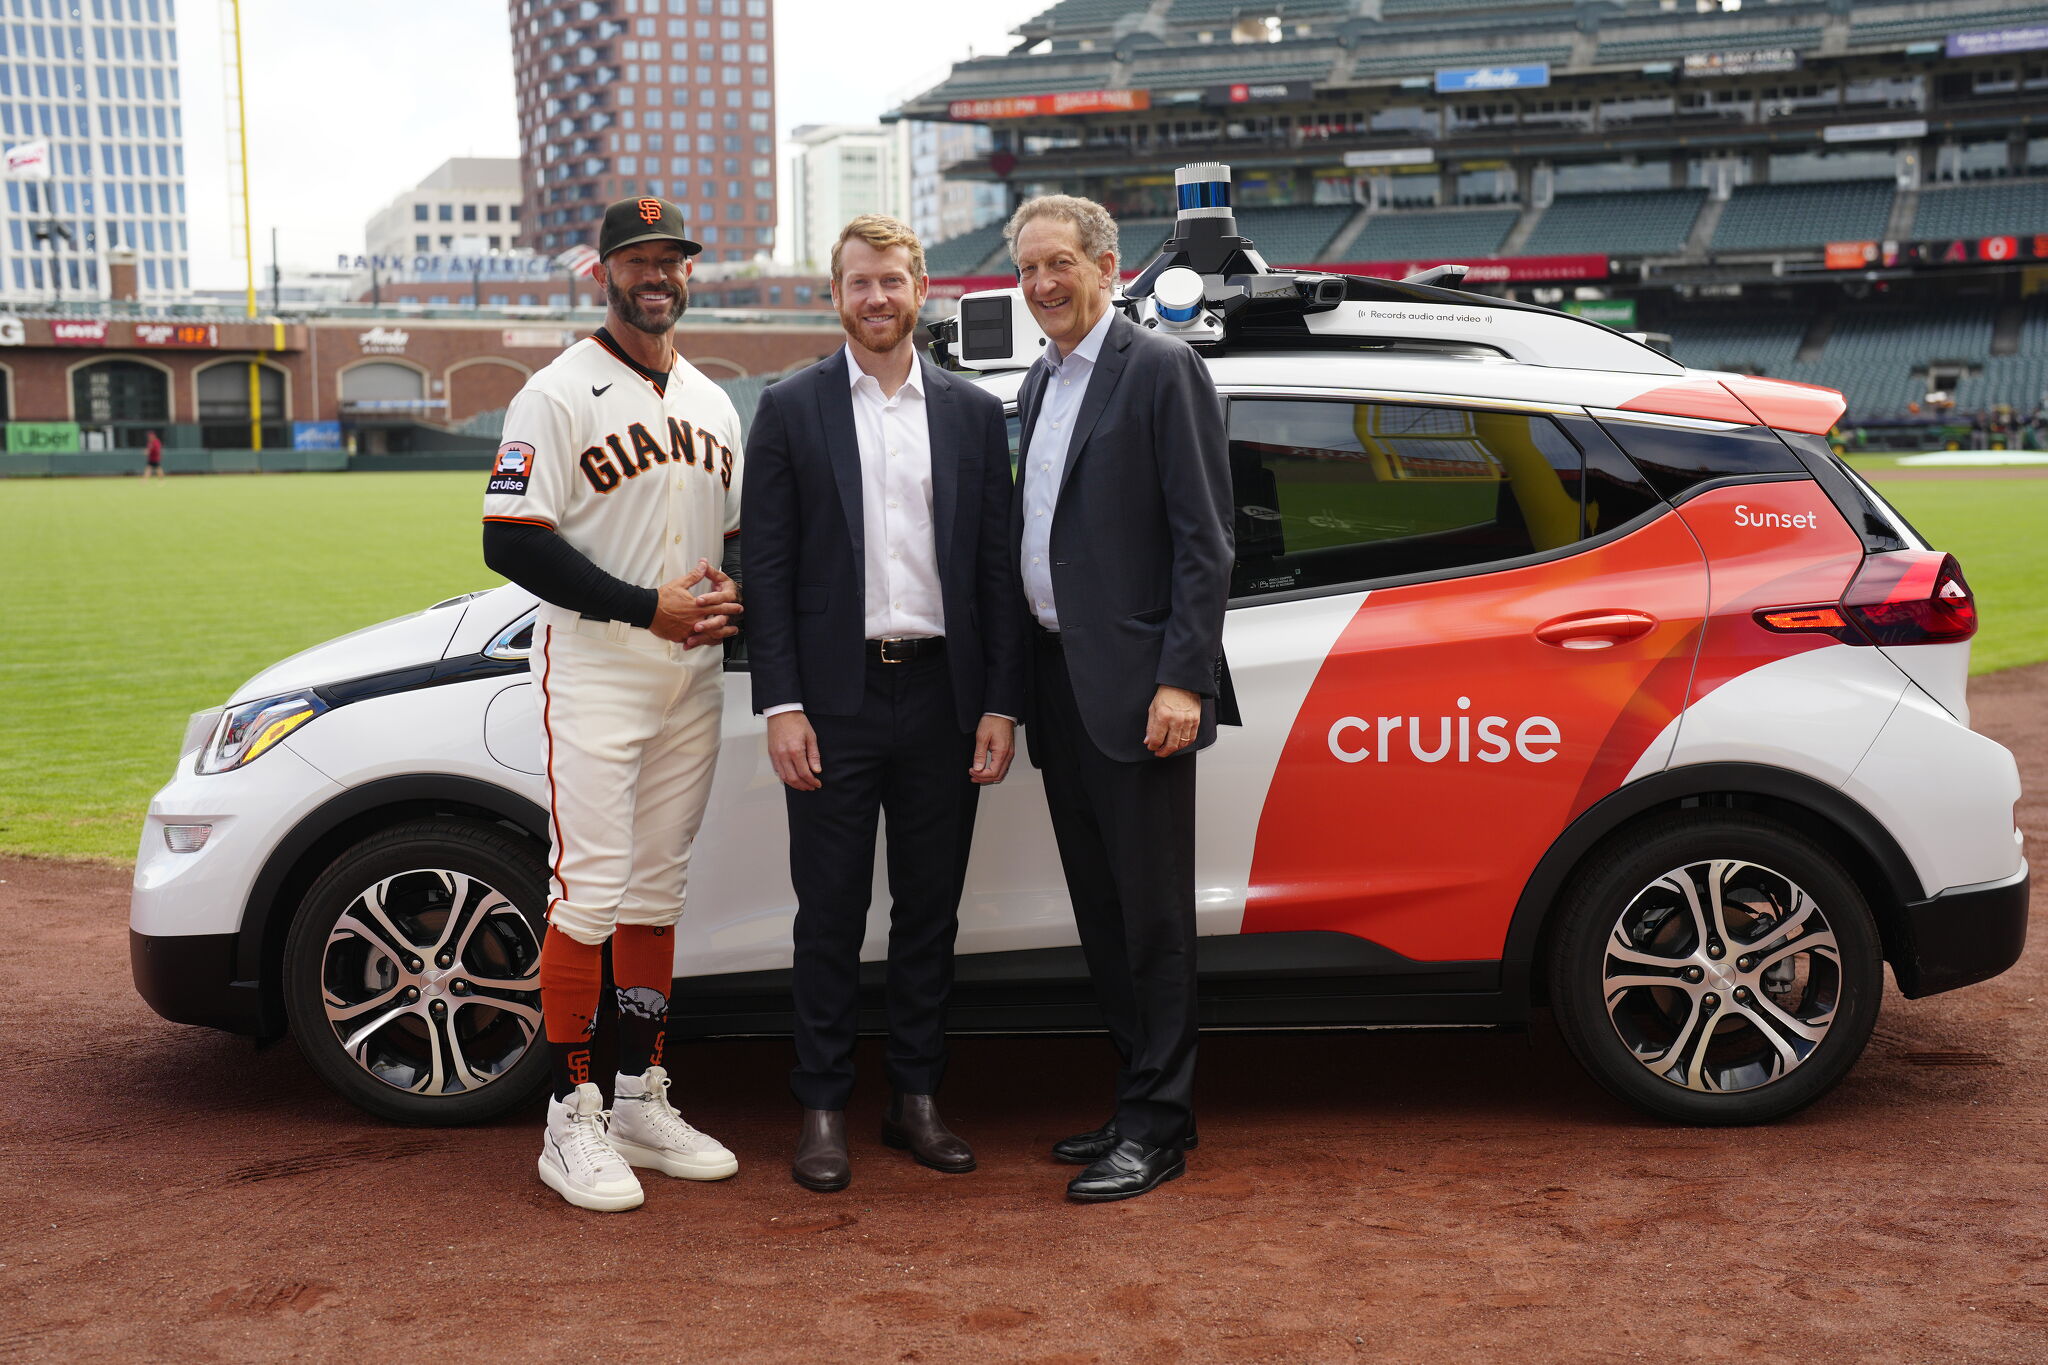 Who will be the San Francisco Giants' jersey sponsor in 2023